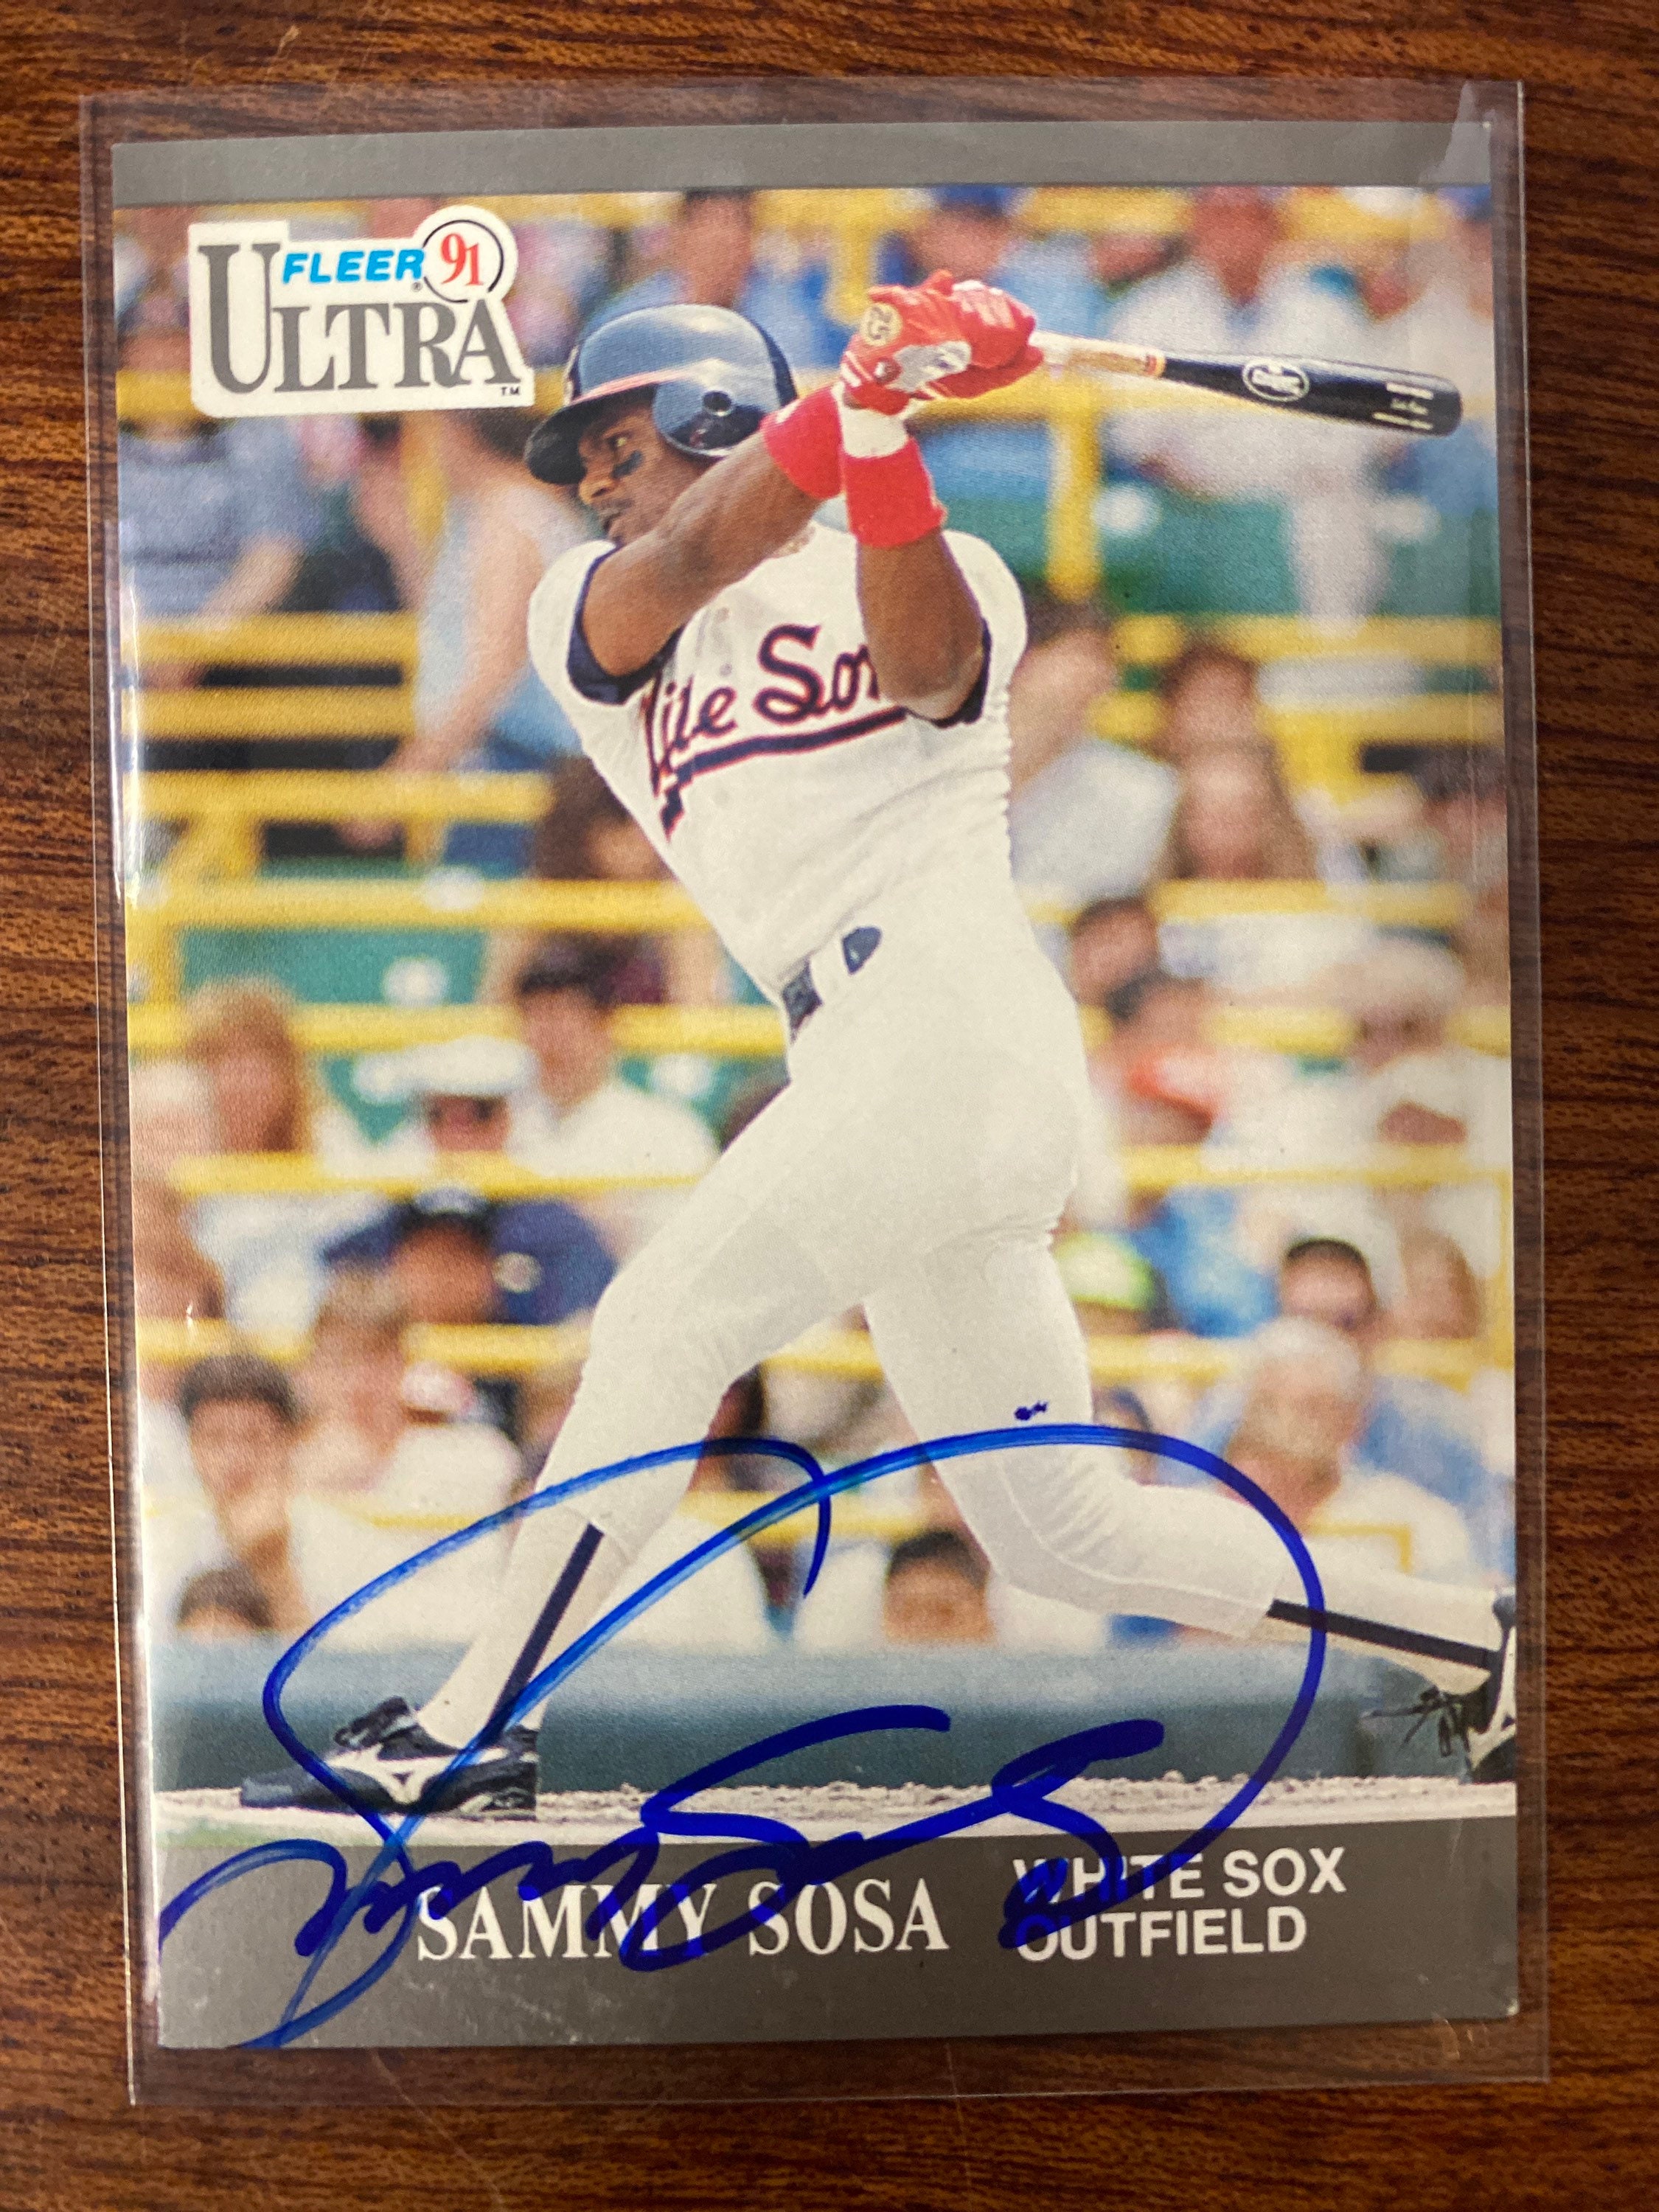 Sammy Sosa Autographed 1990 Topps Rookie Card #692 Chicago White